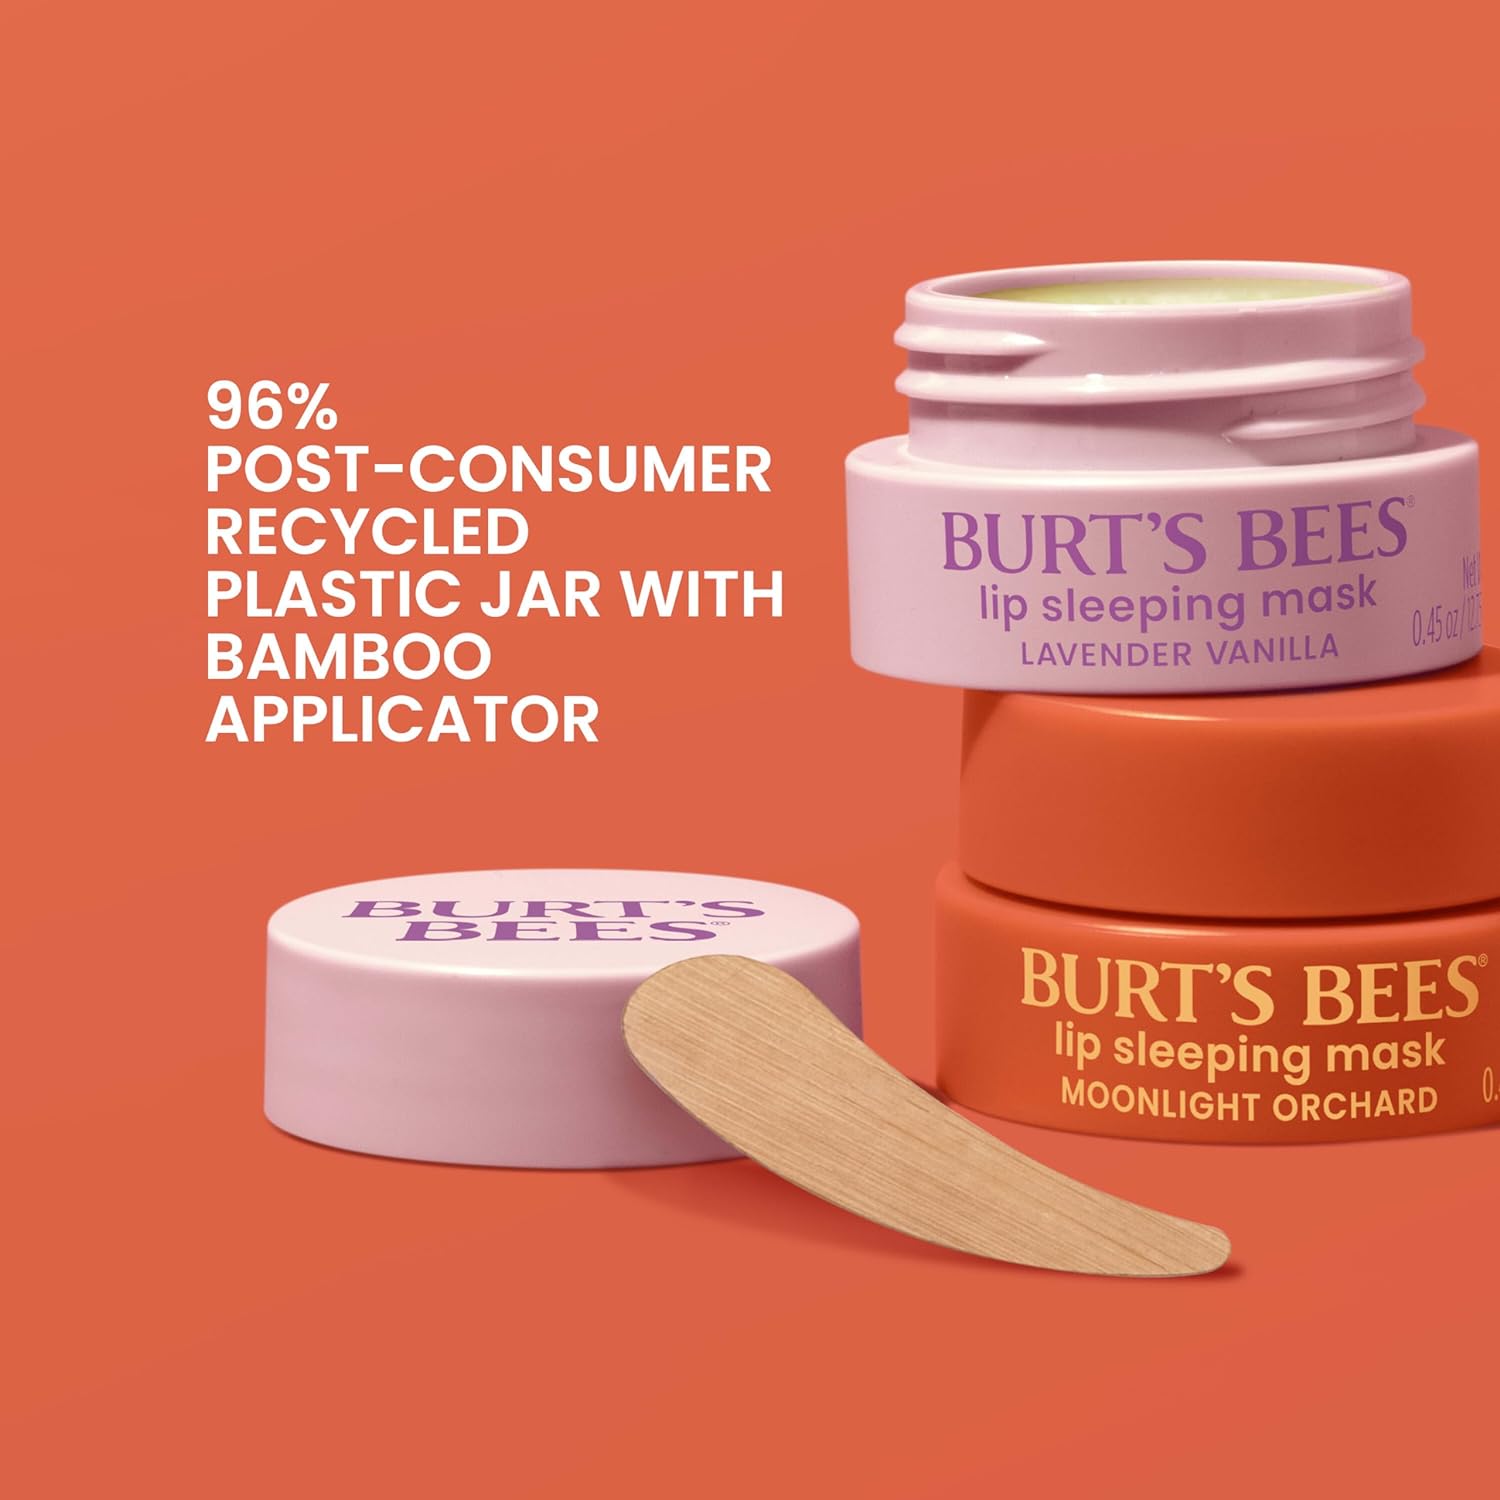 Burt’s Bees Lavender Vanilla Lip Sleeping Mask, With Hyaluronic Acid and Squalane Moisturizer To Instantly Hydrate Lips, Overnight Lip Mask, Lip Treatment, 0.45 oz. : Beauty & Personal Care